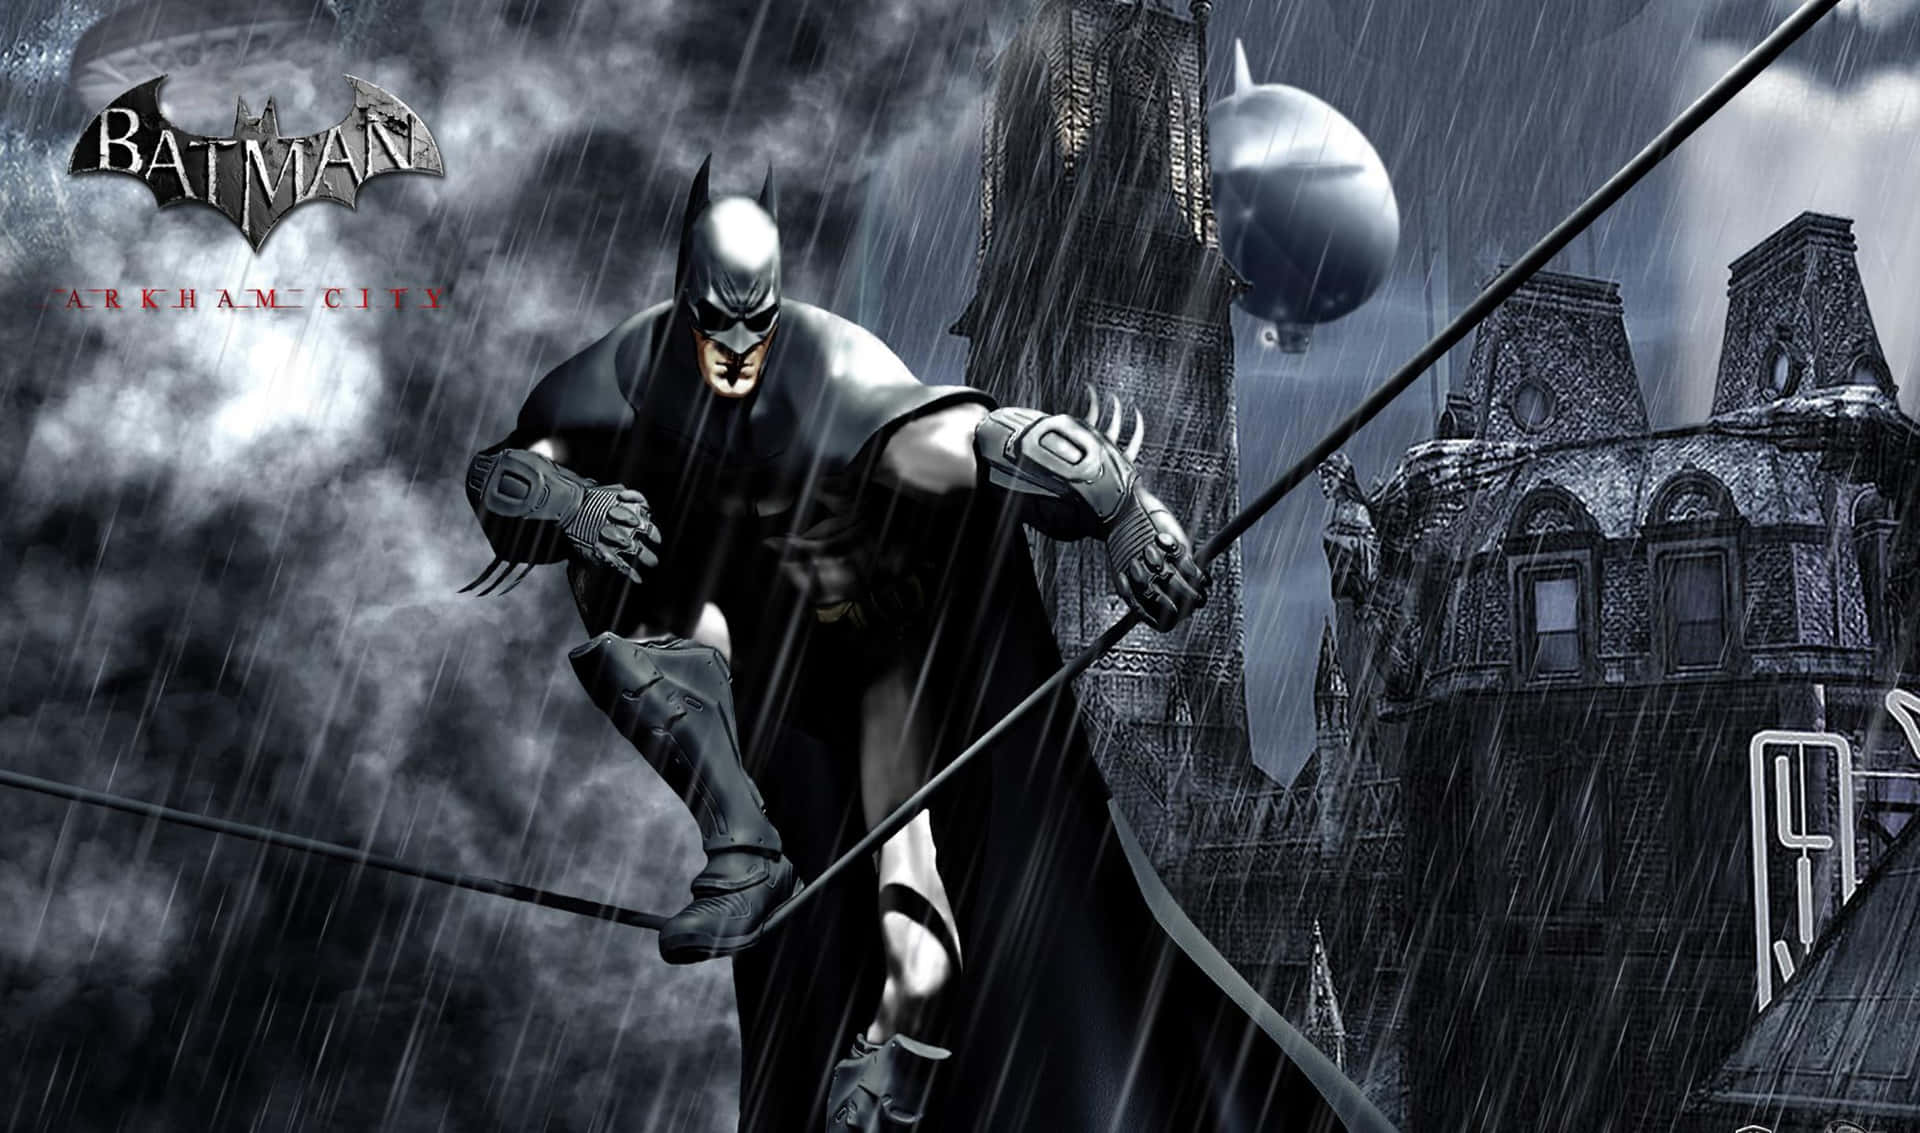 Batman faces his fears in the game Arkham City